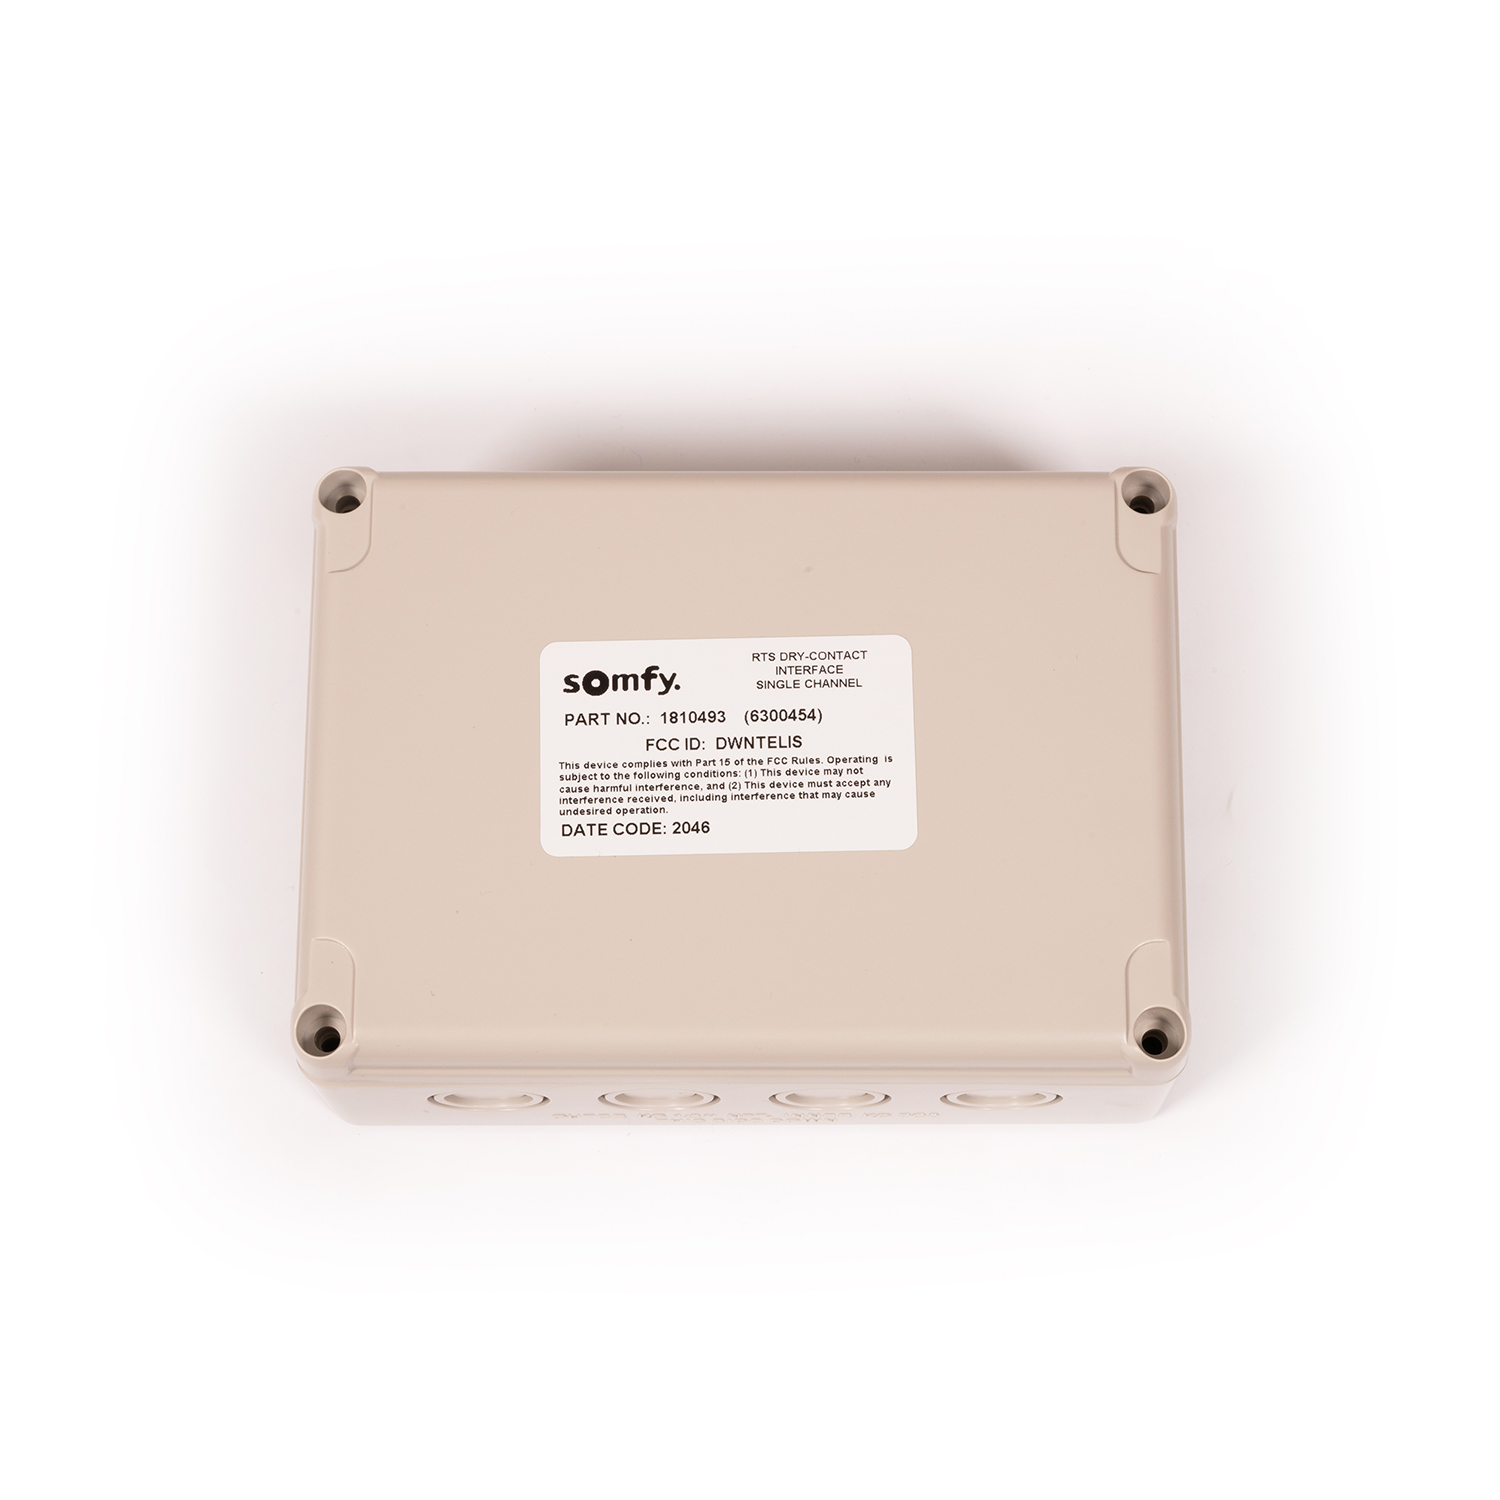 1-Channel Somfy RTS Transmitter with Dry Contact Inputs 1810493 